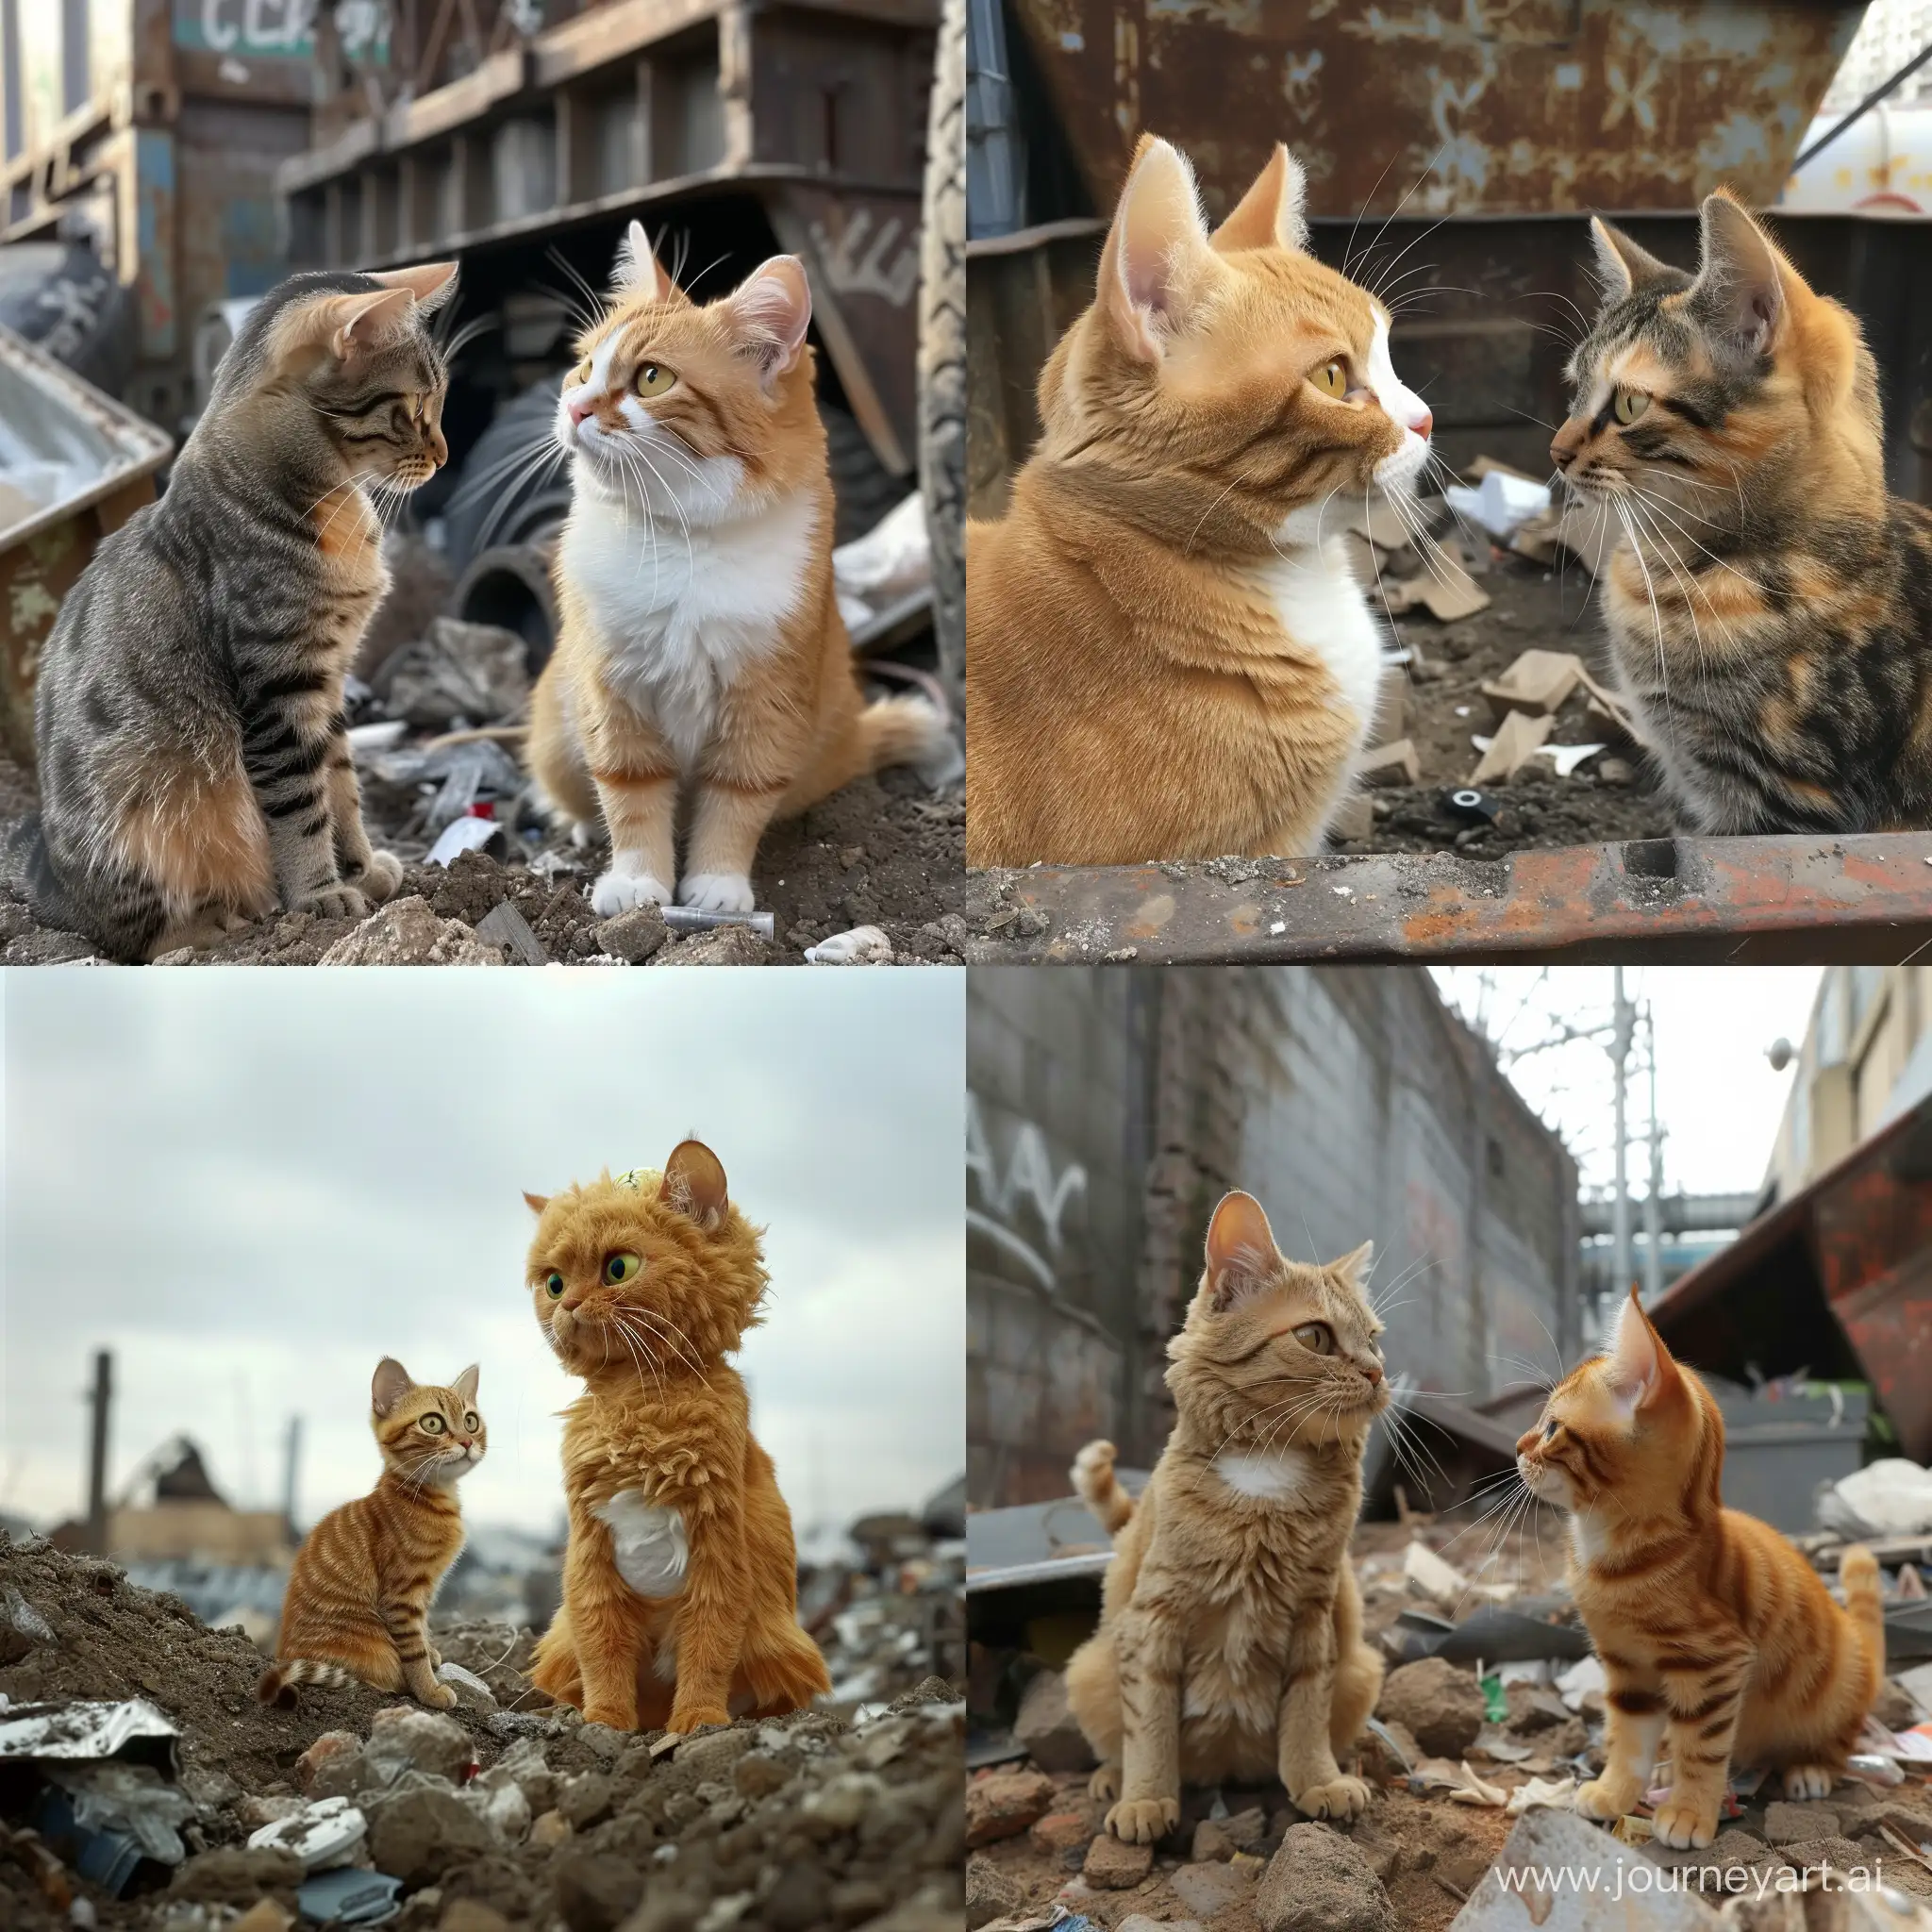 Charming-Encounter-Garfield-the-Plump-Cat-Finds-Love-on-the-Trash-Heap